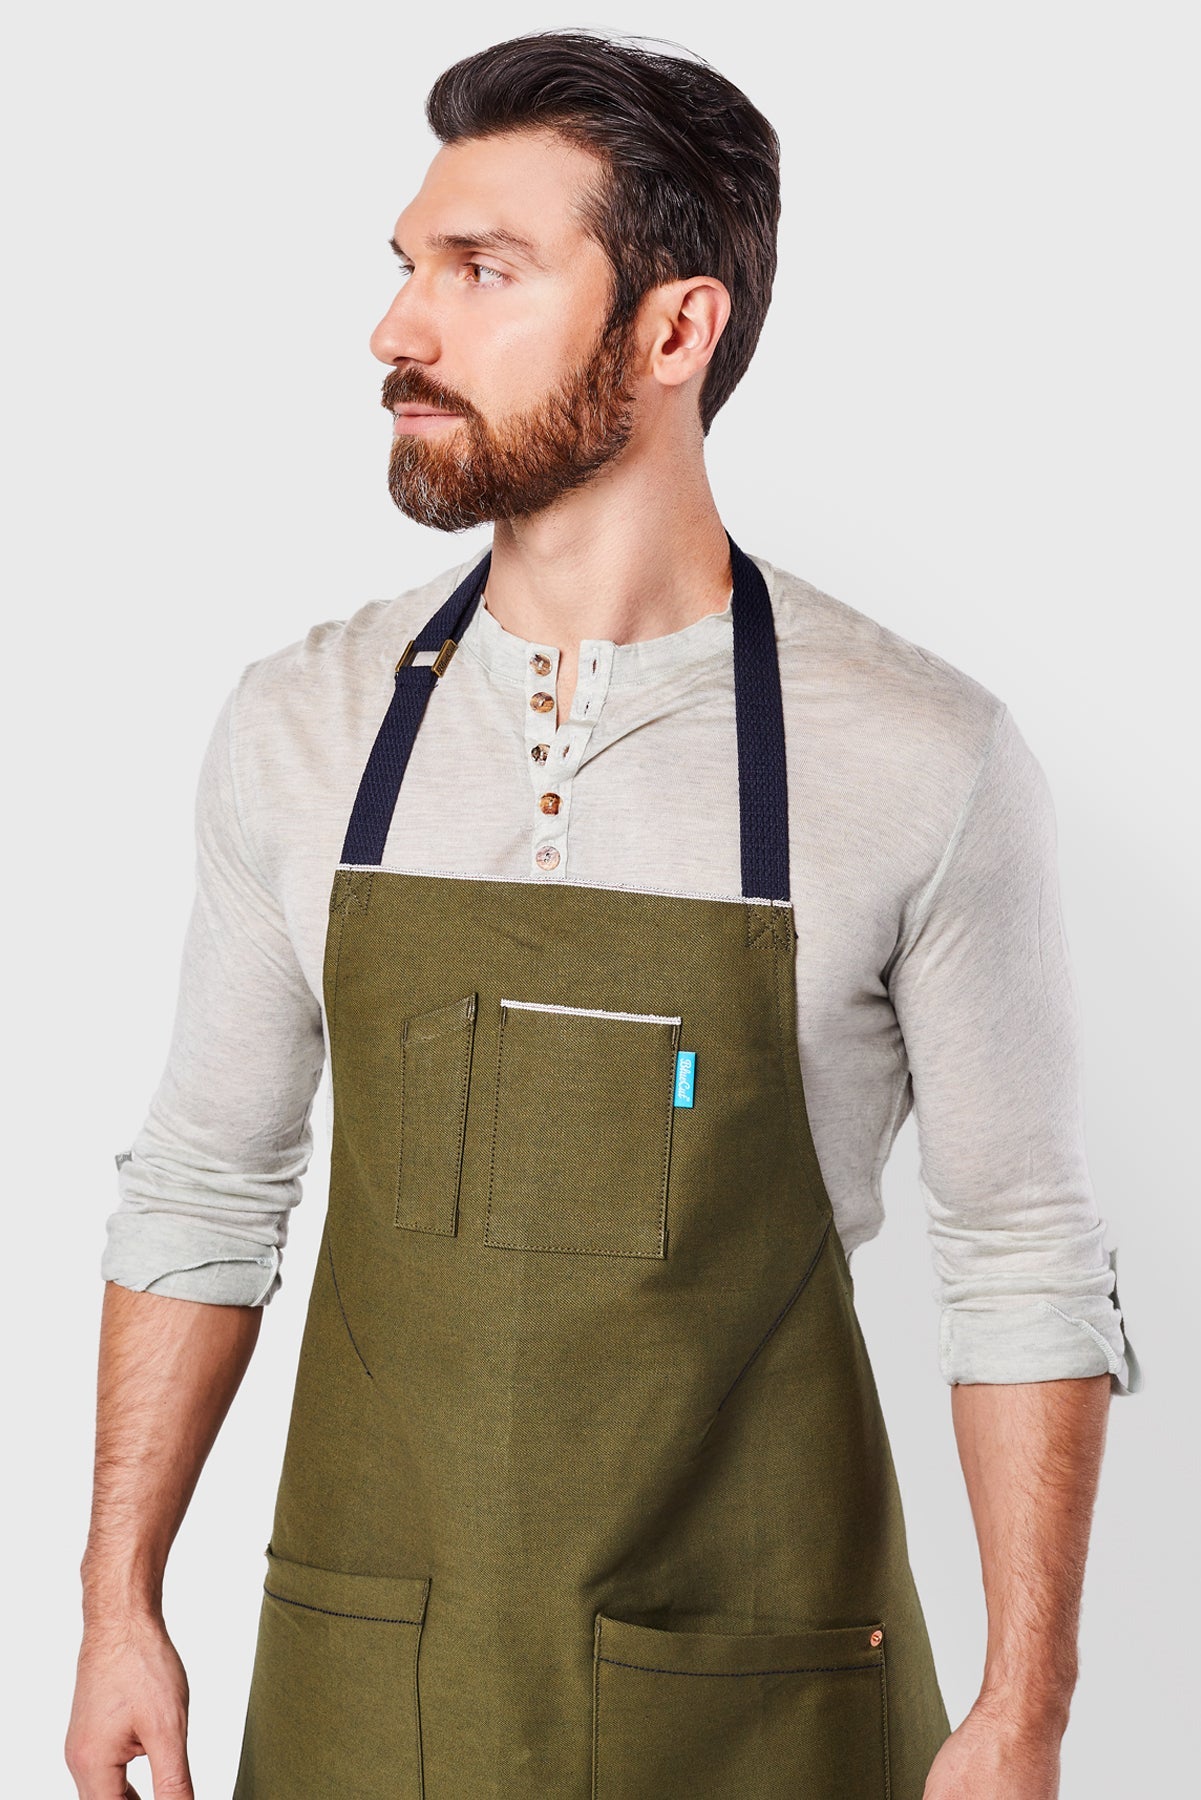 Close up image of person wearing Mason Apron in Olive Selvage Denim. | BlueCut Aprons